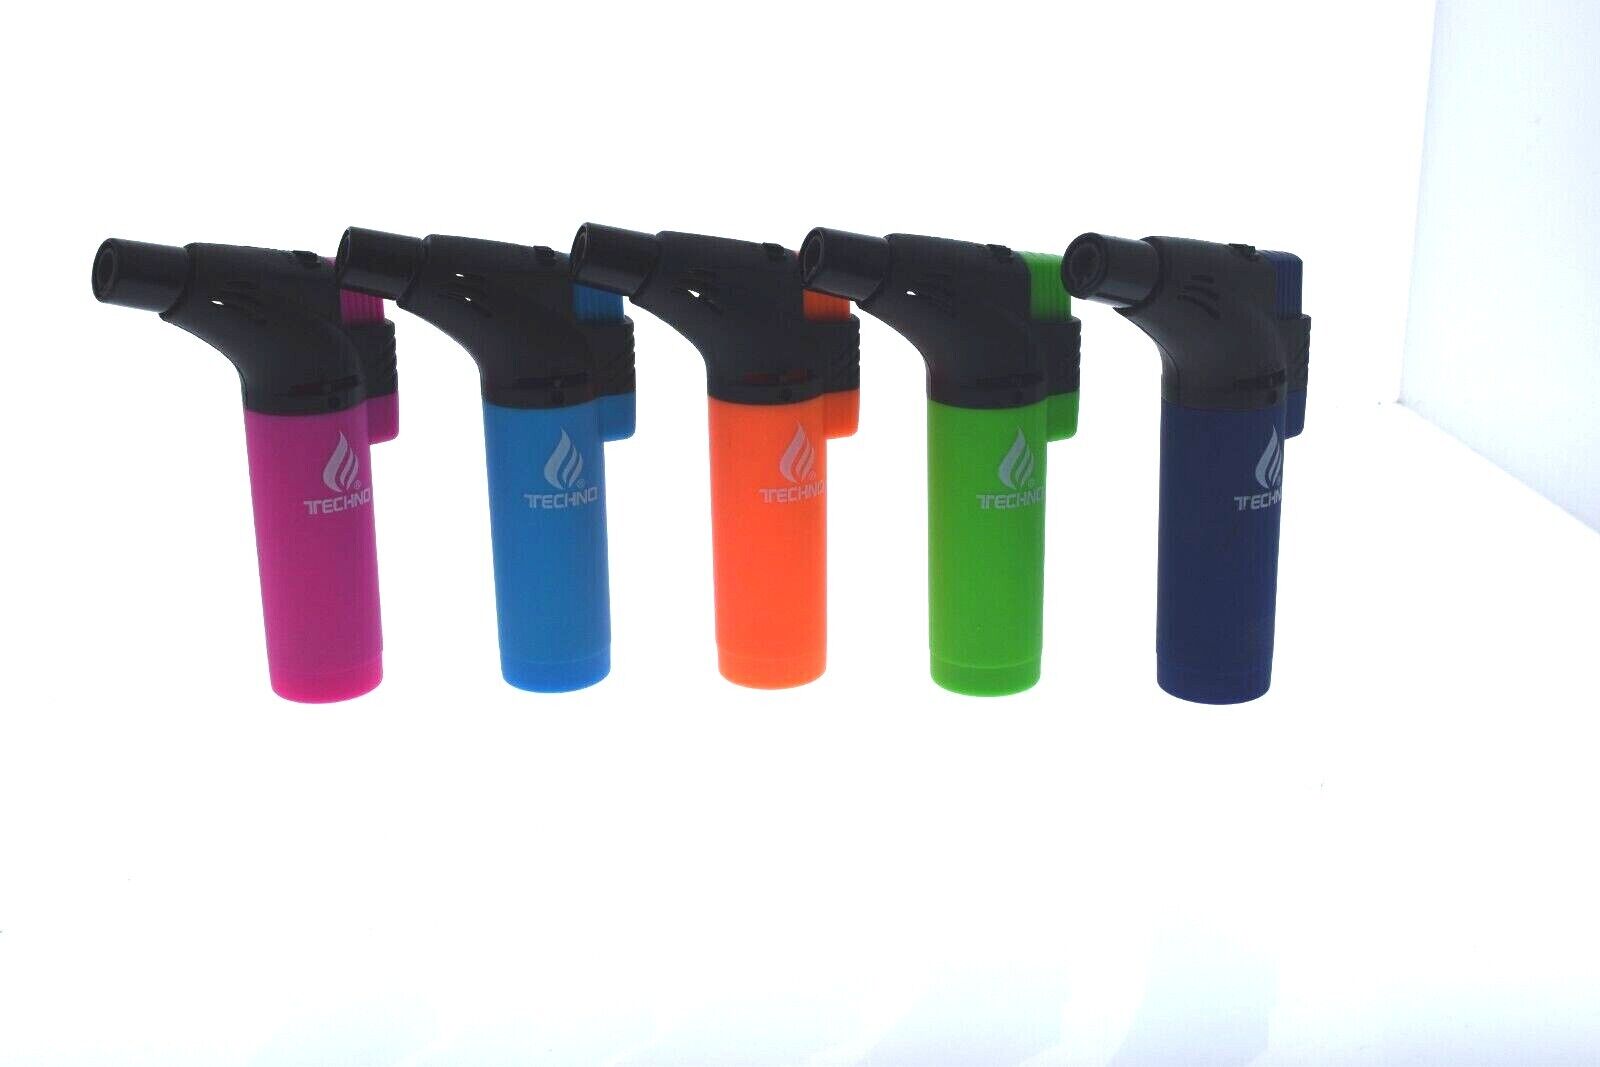 TECHNO ANGLE BUTANE TORCH LIGHTER- CHOOSE EACH COLOR OR WHOLE DISPLAY